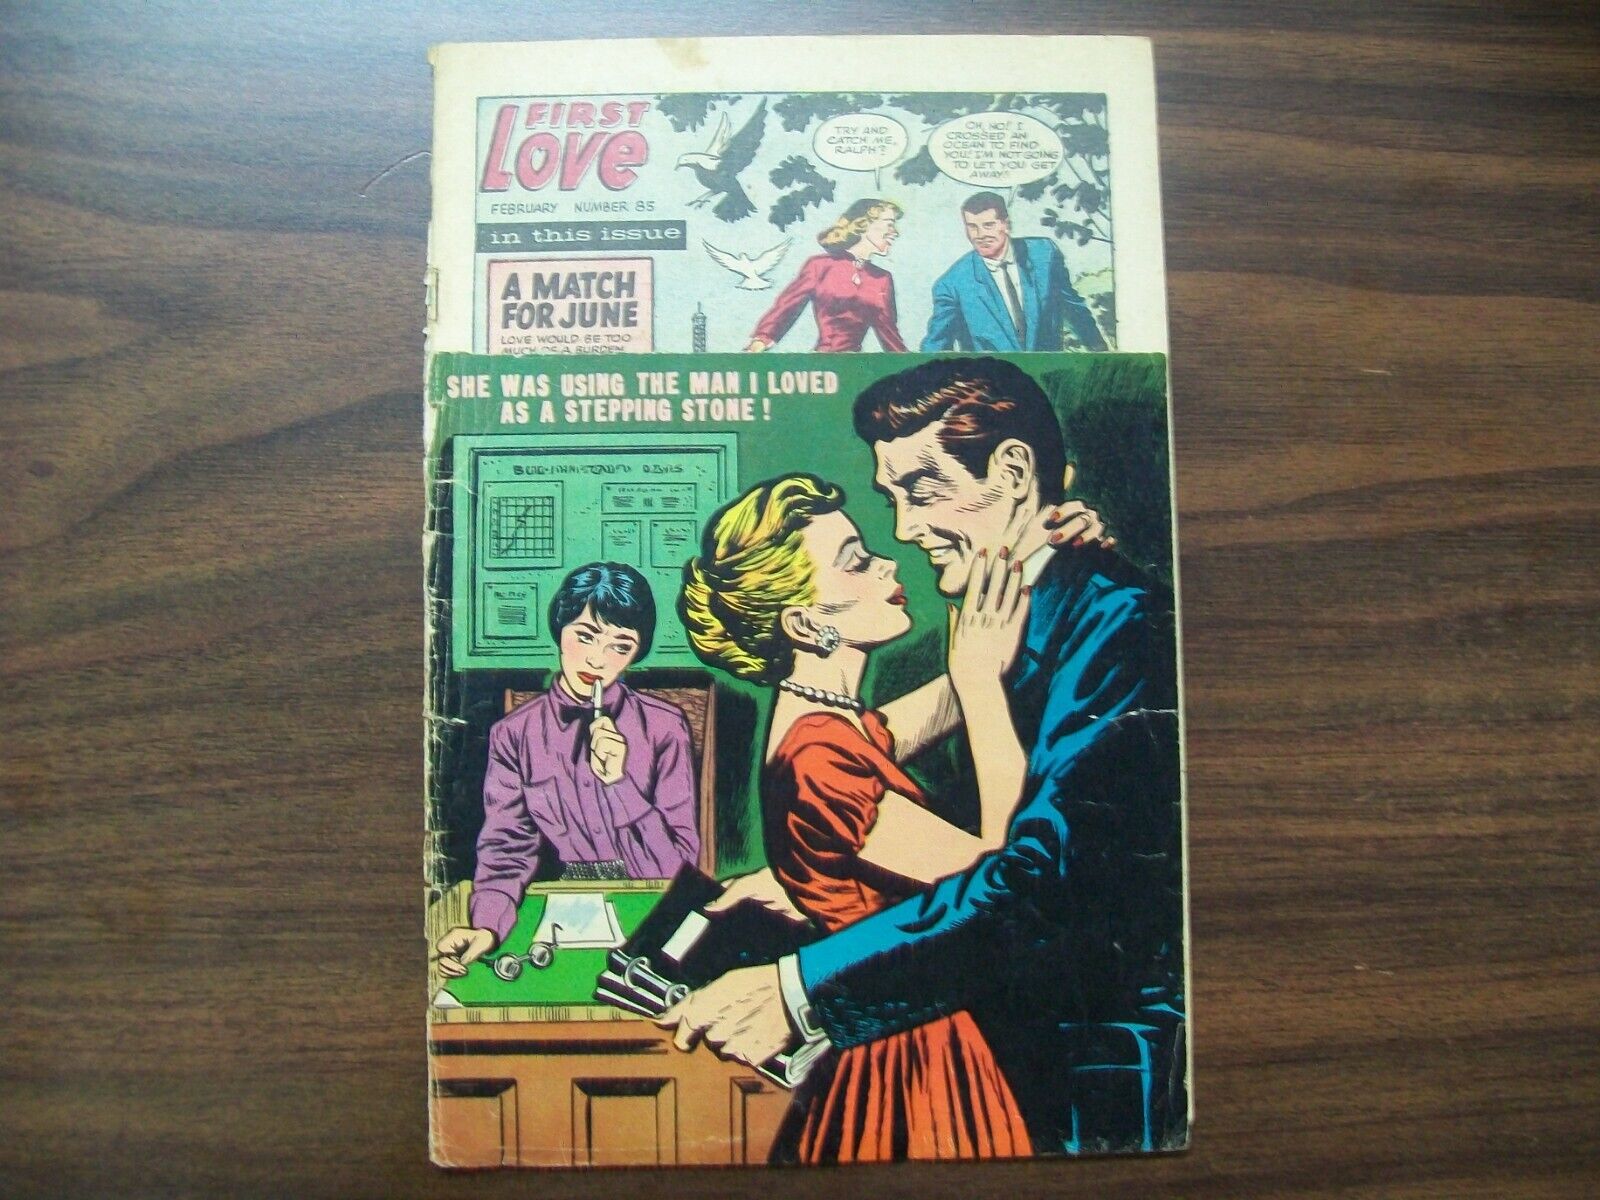 First Love Illustrated #85 By Harvey Comics (1958) in Poor Condition